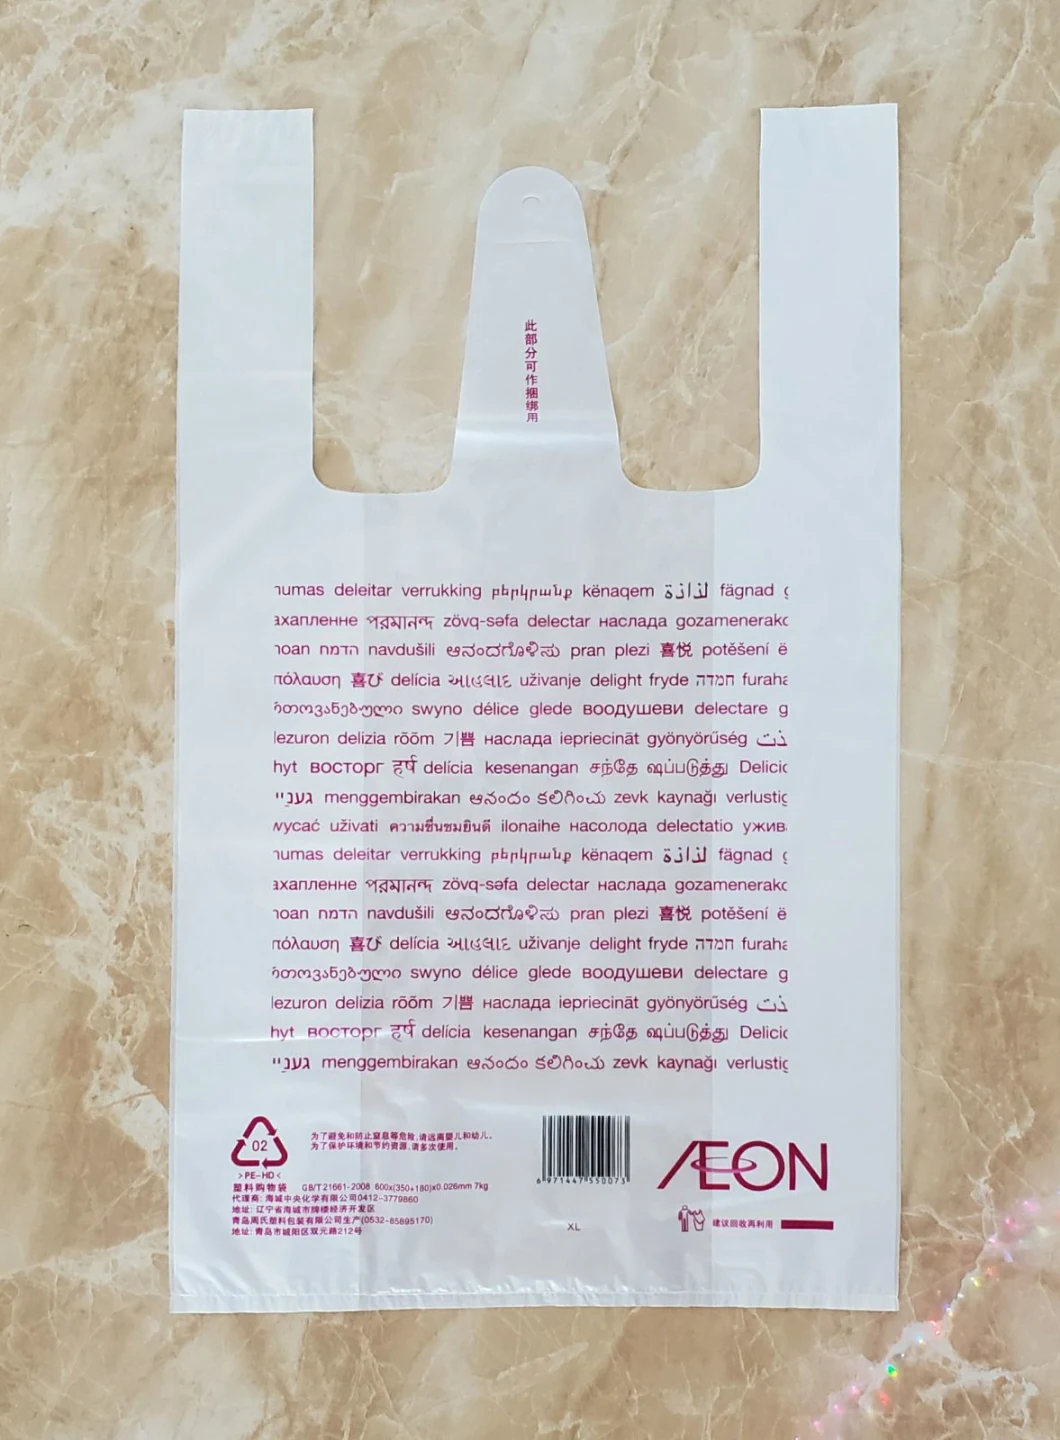 Sacs Et Compostables/De Courses, Biodegradable and Compostable Shopping Bags/Food Bags/ Fresh Produce Bags/ Food Service Bags/ to-Go Bags/ T-Shirt Bags/ Biobags